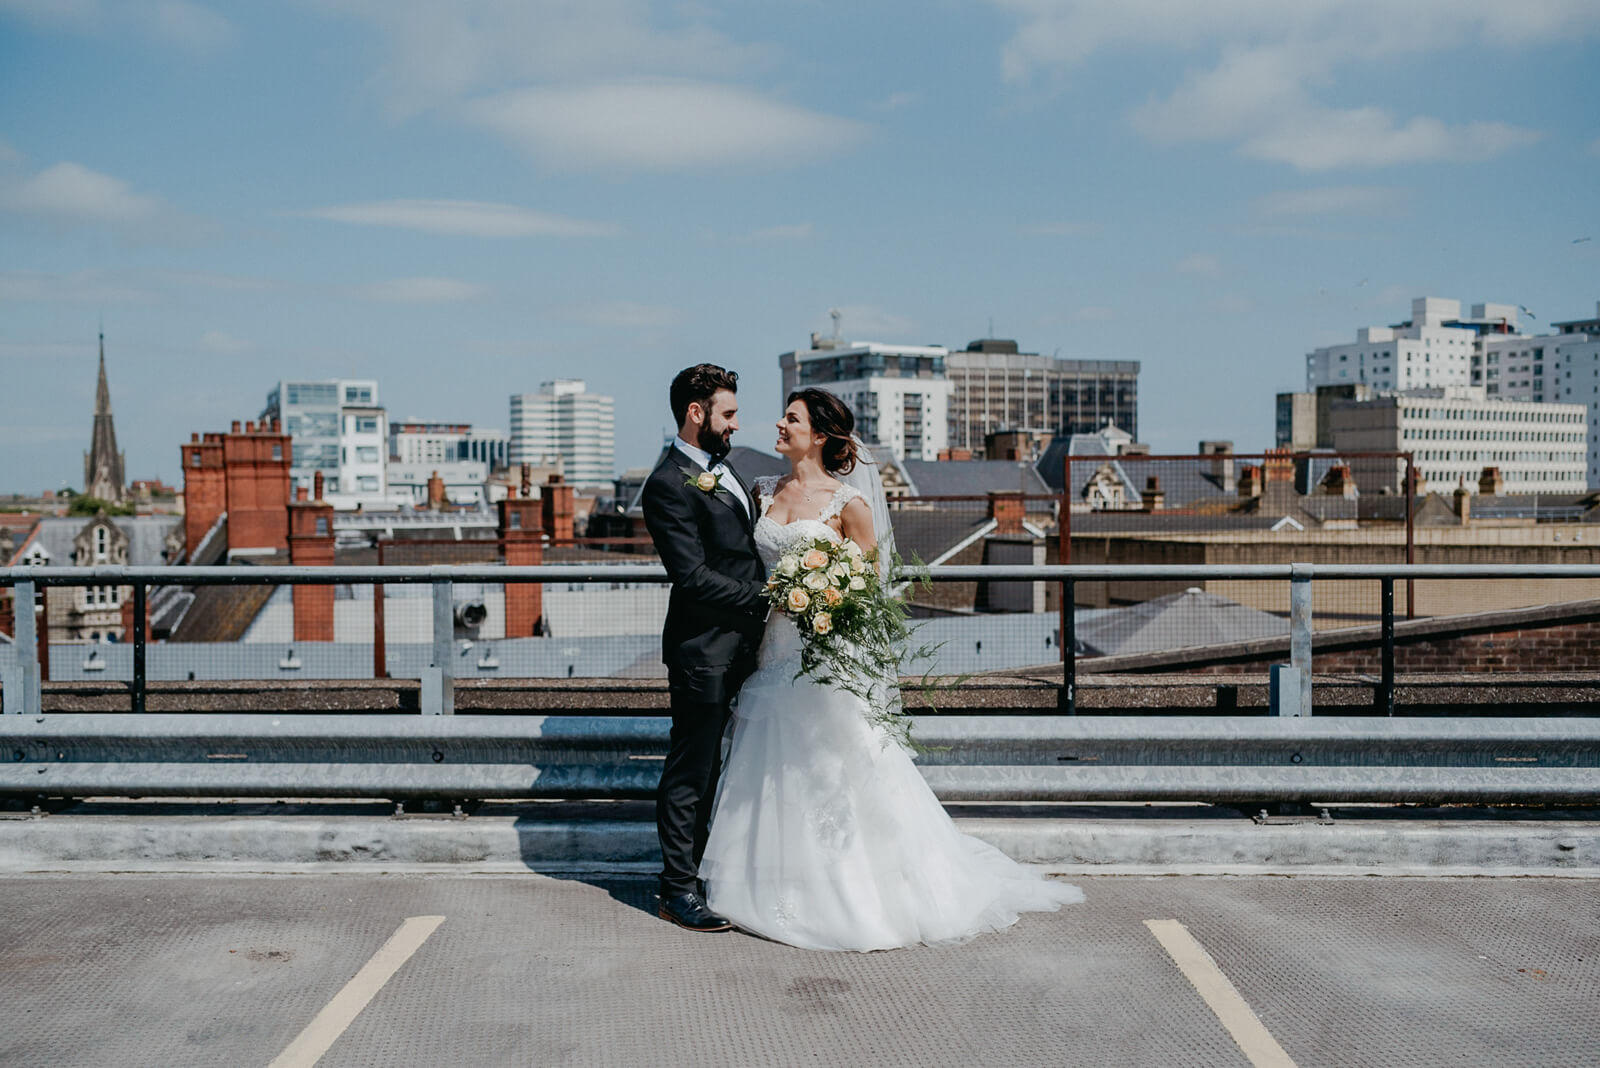 adventerous alternative bride and groom on rooftop for portraits in city...new york wedding photographer